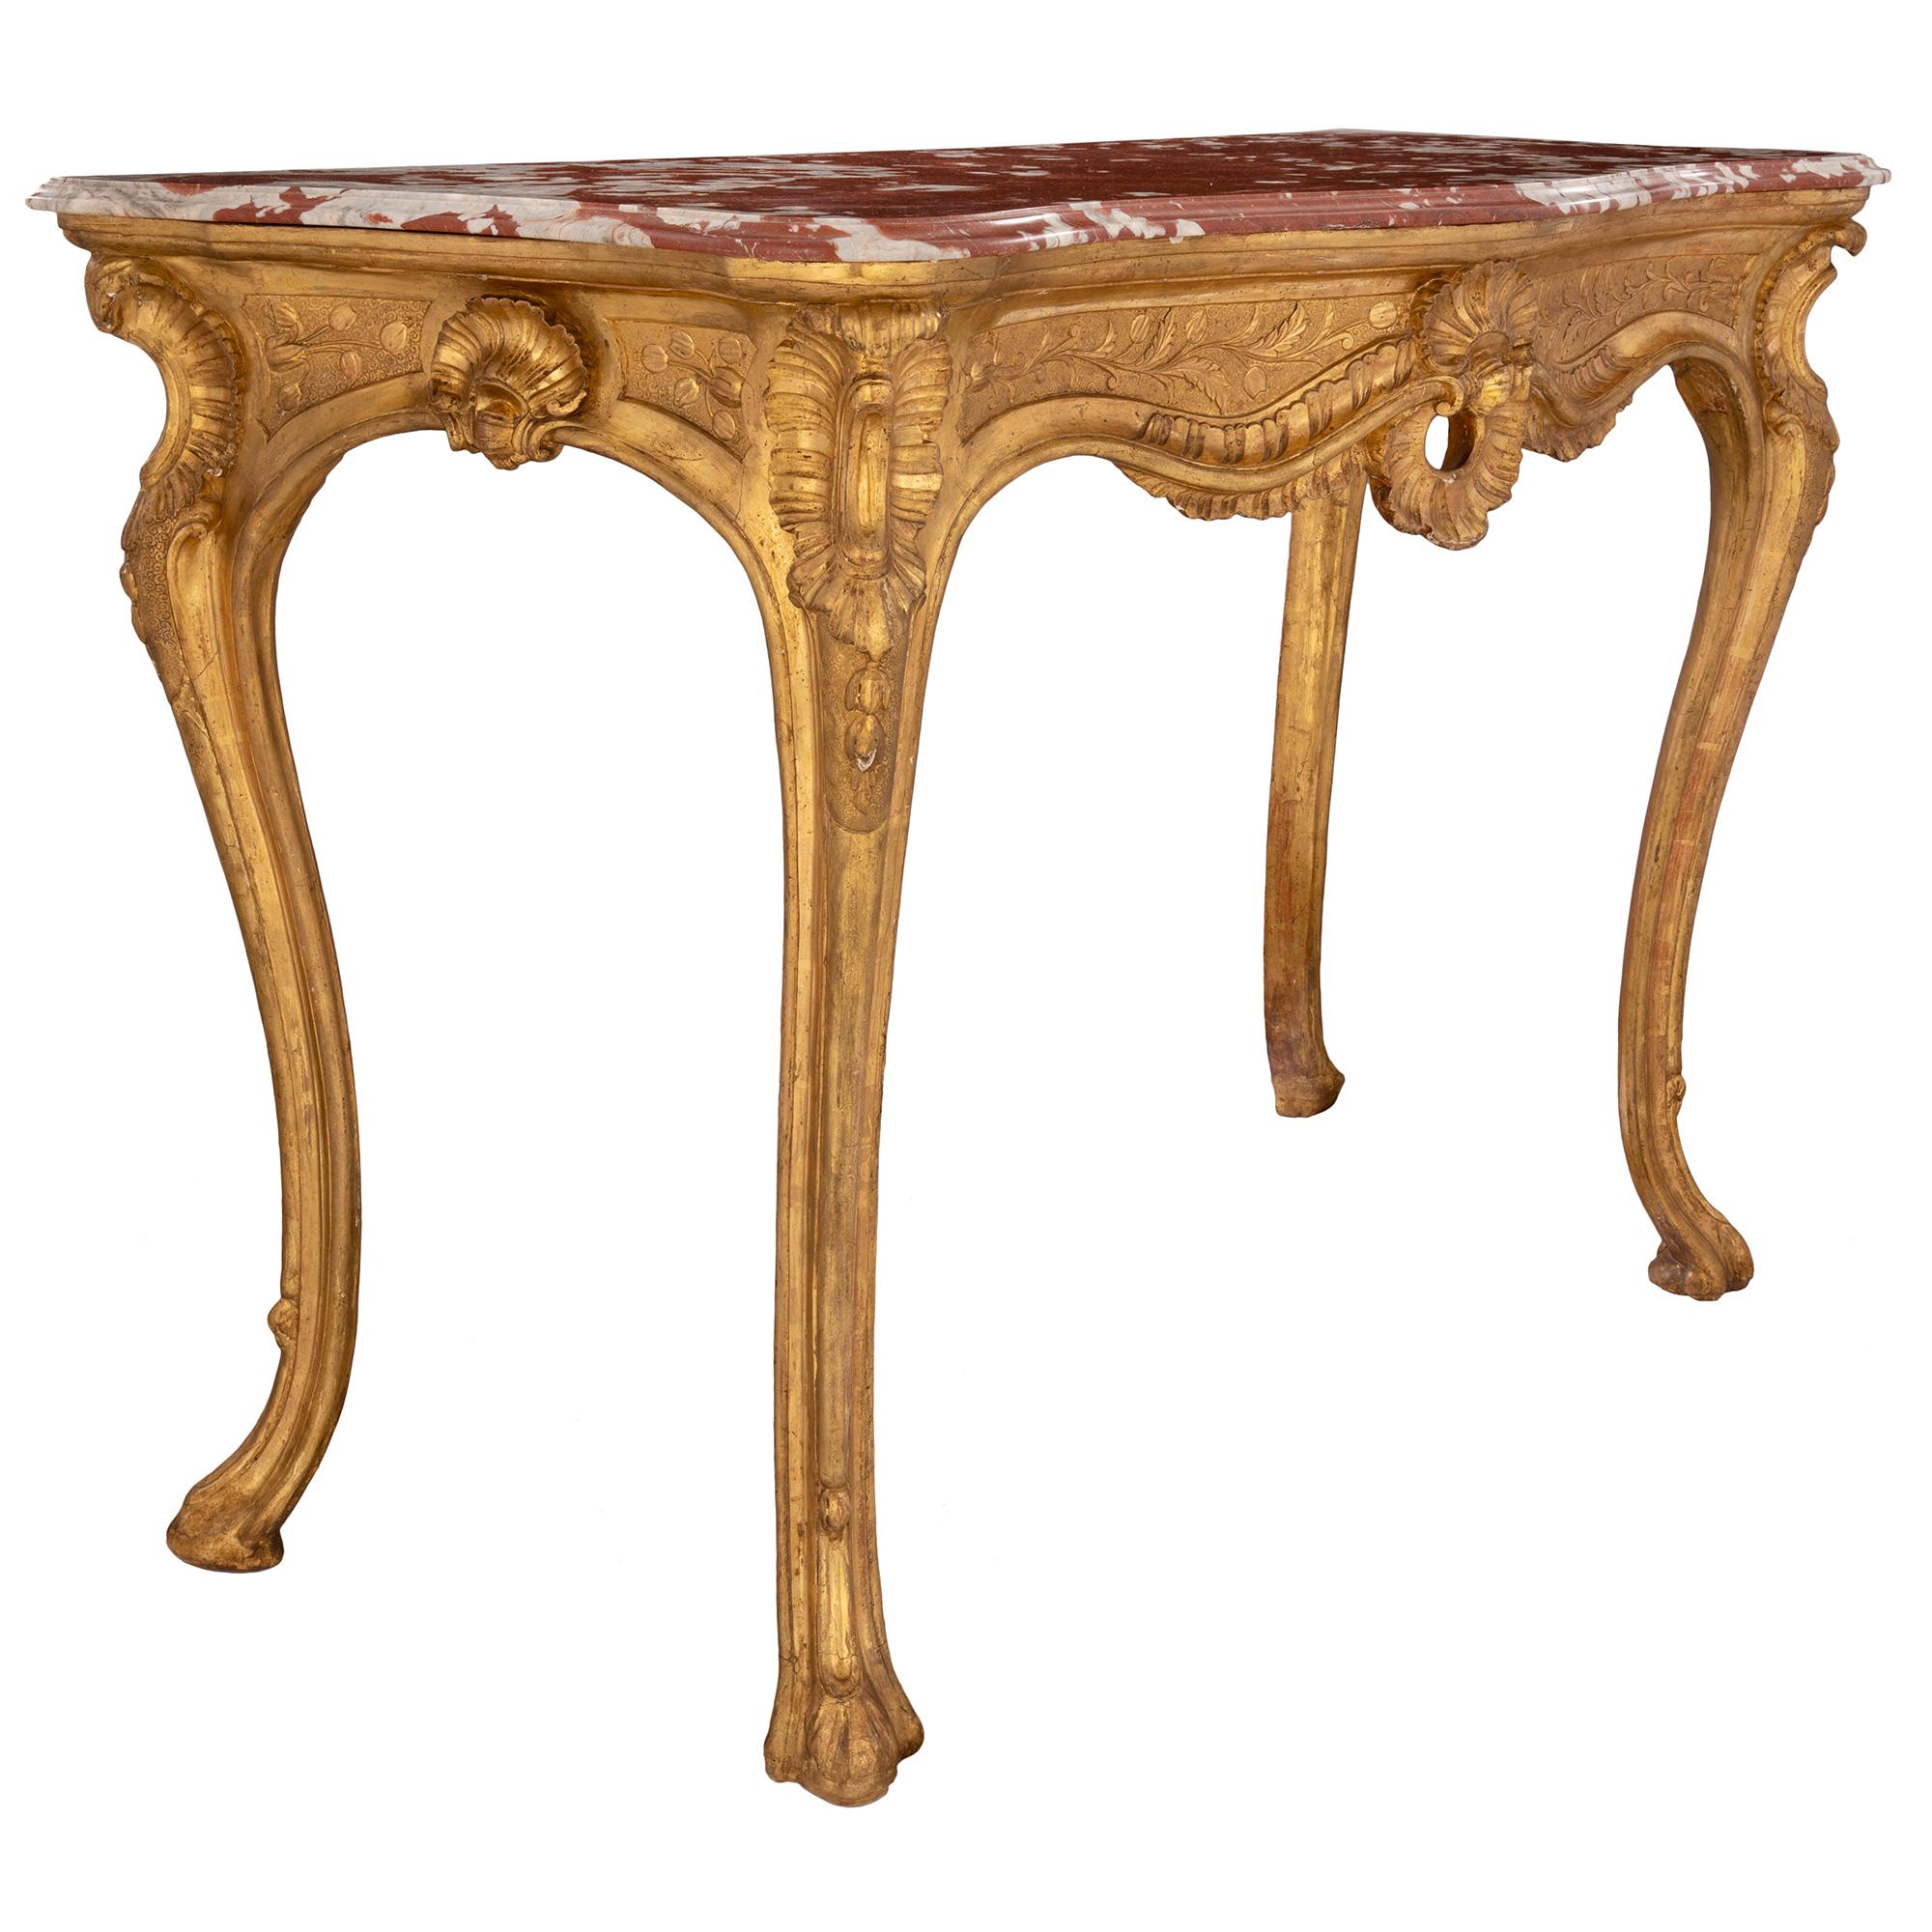 Italian 18th Century Louis XV Period Giltwood and Marble Freestanding Console In Good Condition For Sale In West Palm Beach, FL